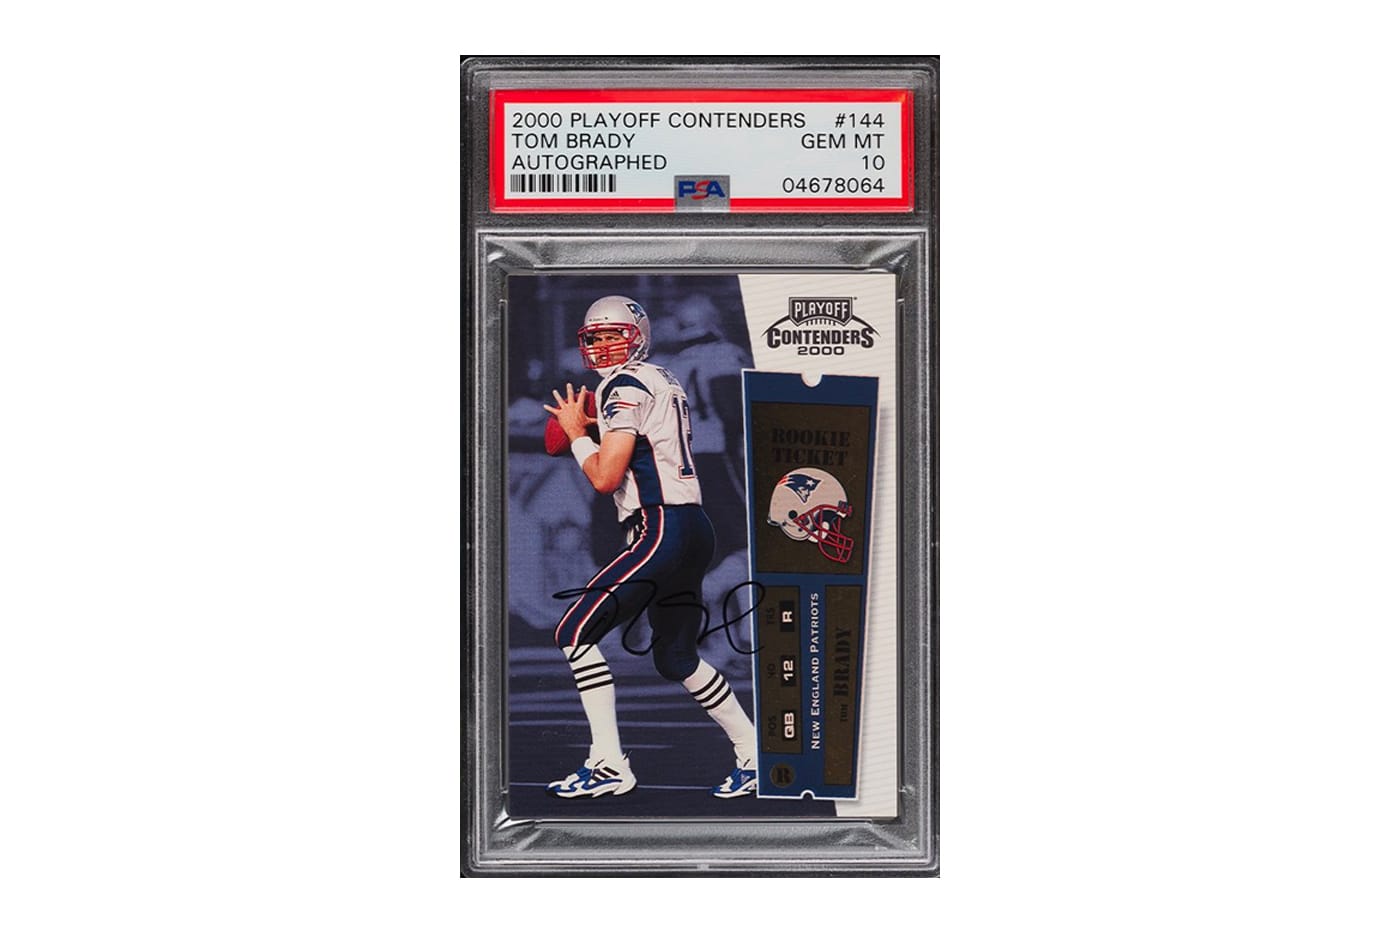 TOM BRADY 2019 Donruss Panini Lot of 9 Different Mixed Years Football Trading Cards Blind Pack New England Patriots w/Free Surprise Bonus Card! 